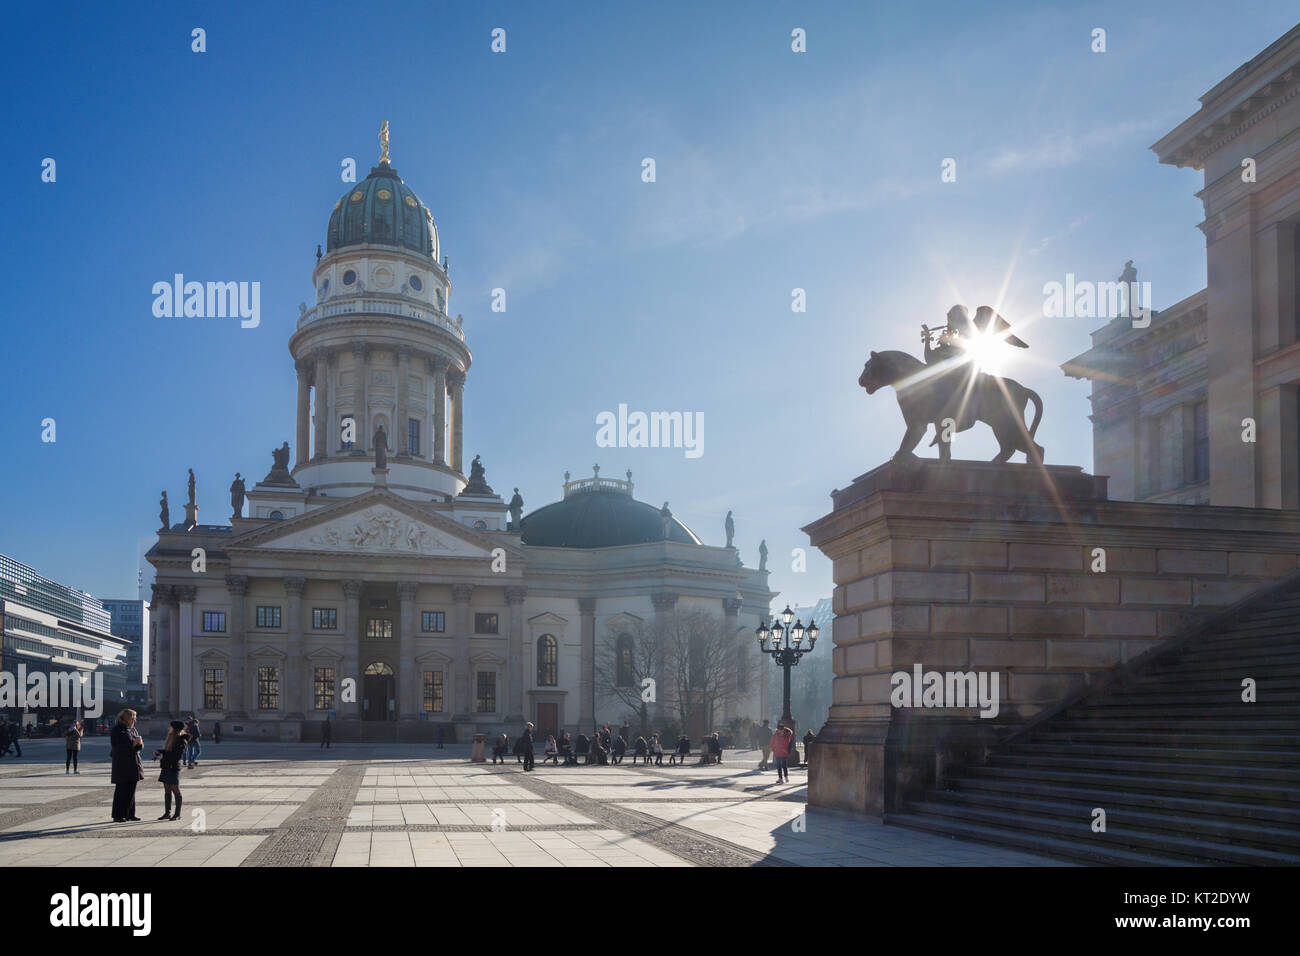 BERLIN, GERMANY, FEBRUARY - 14, 2017: The Konzerthaus building and the German Dom on the Gendarmenmarkt square. Stock Photo